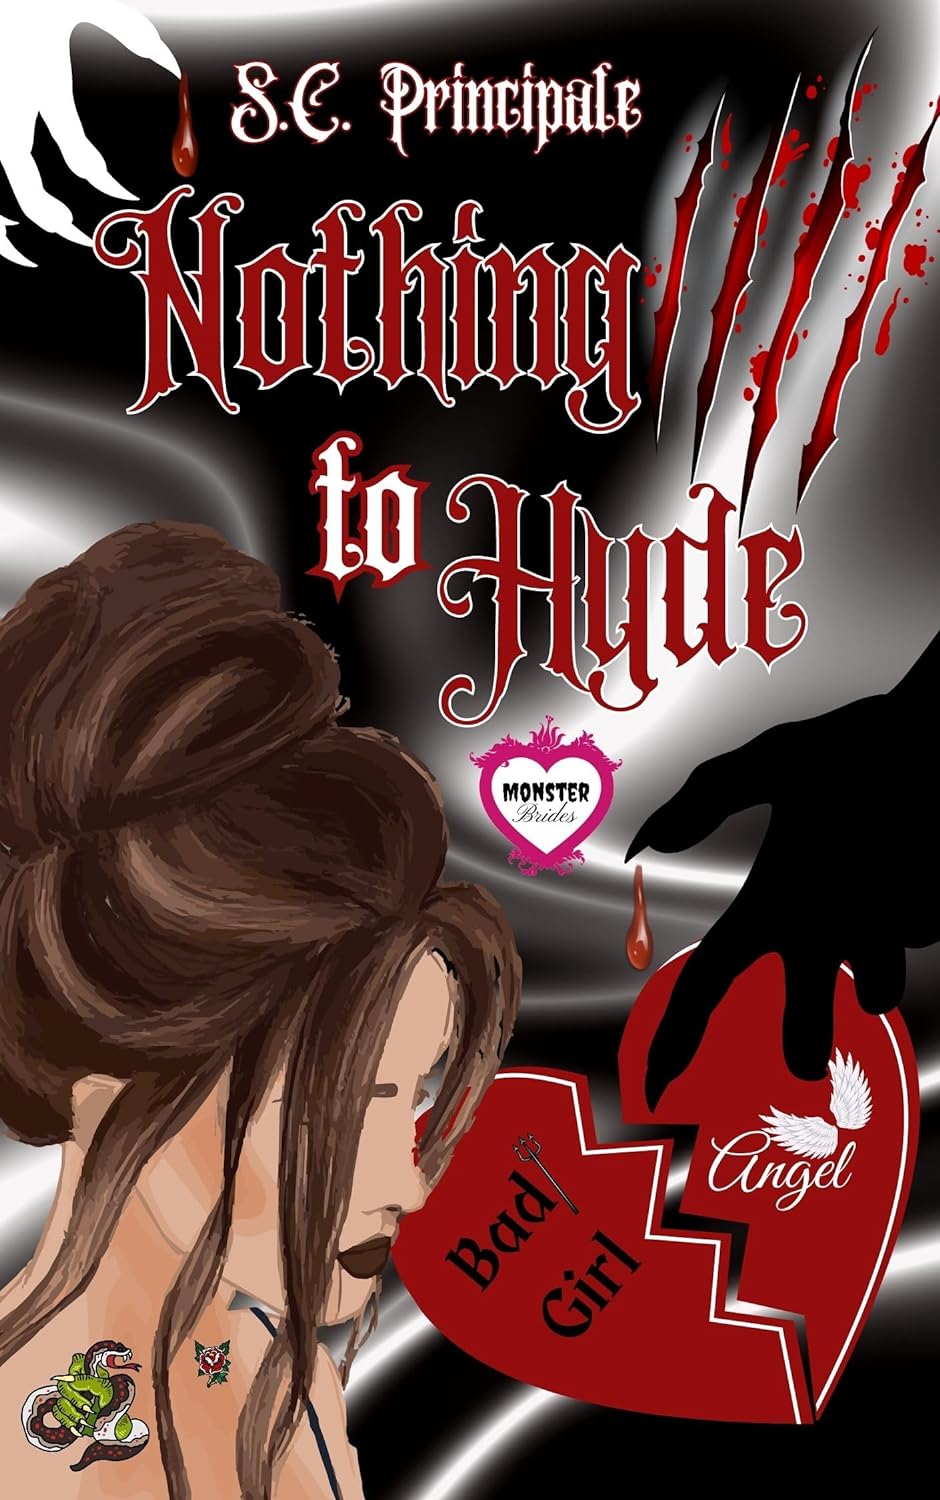 Nothing to Hyde by S.C. Principale